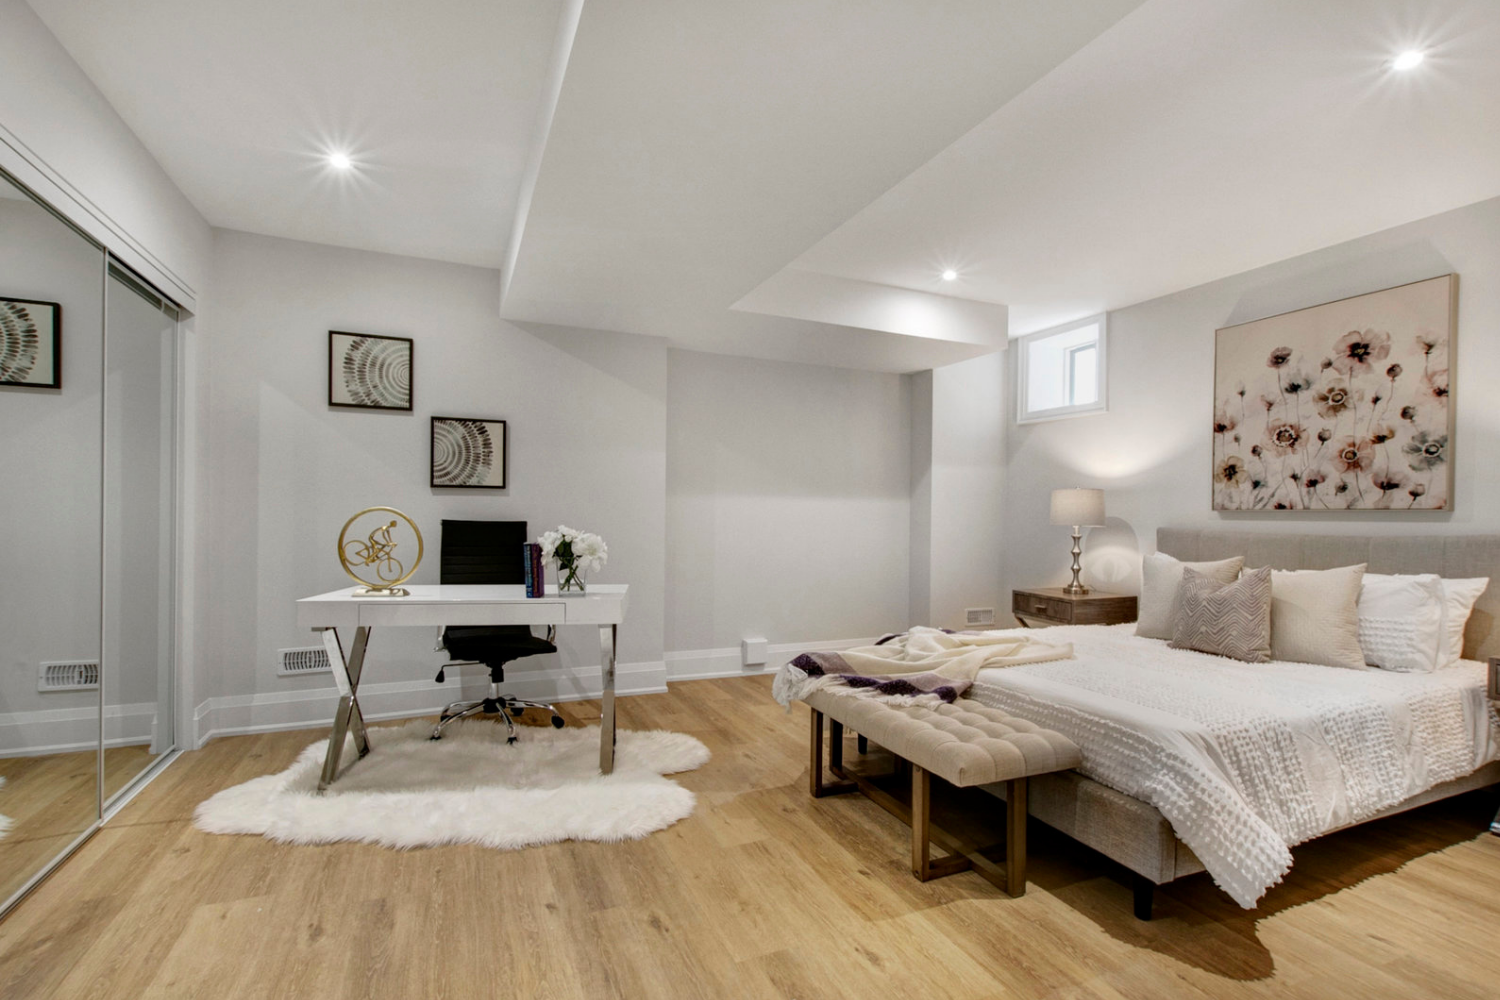 Large master bedroom with white ceiling and wooden floors staged for sale with king bed, desk, office chair, white fur carpet, wall painting, side table and lamp.